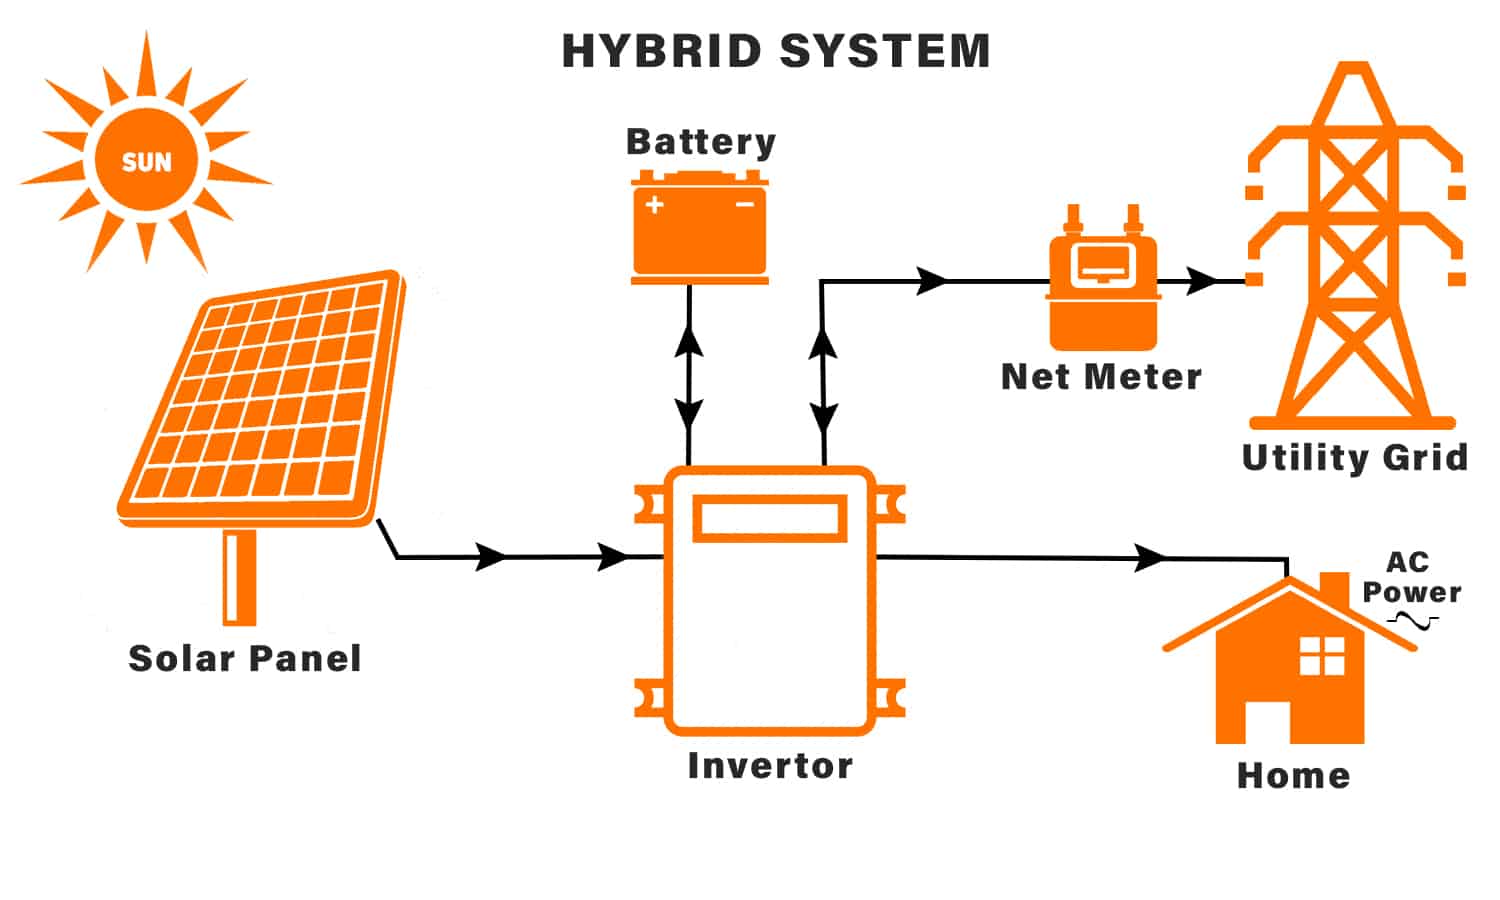 What is the benefits of a hybrid solar system?